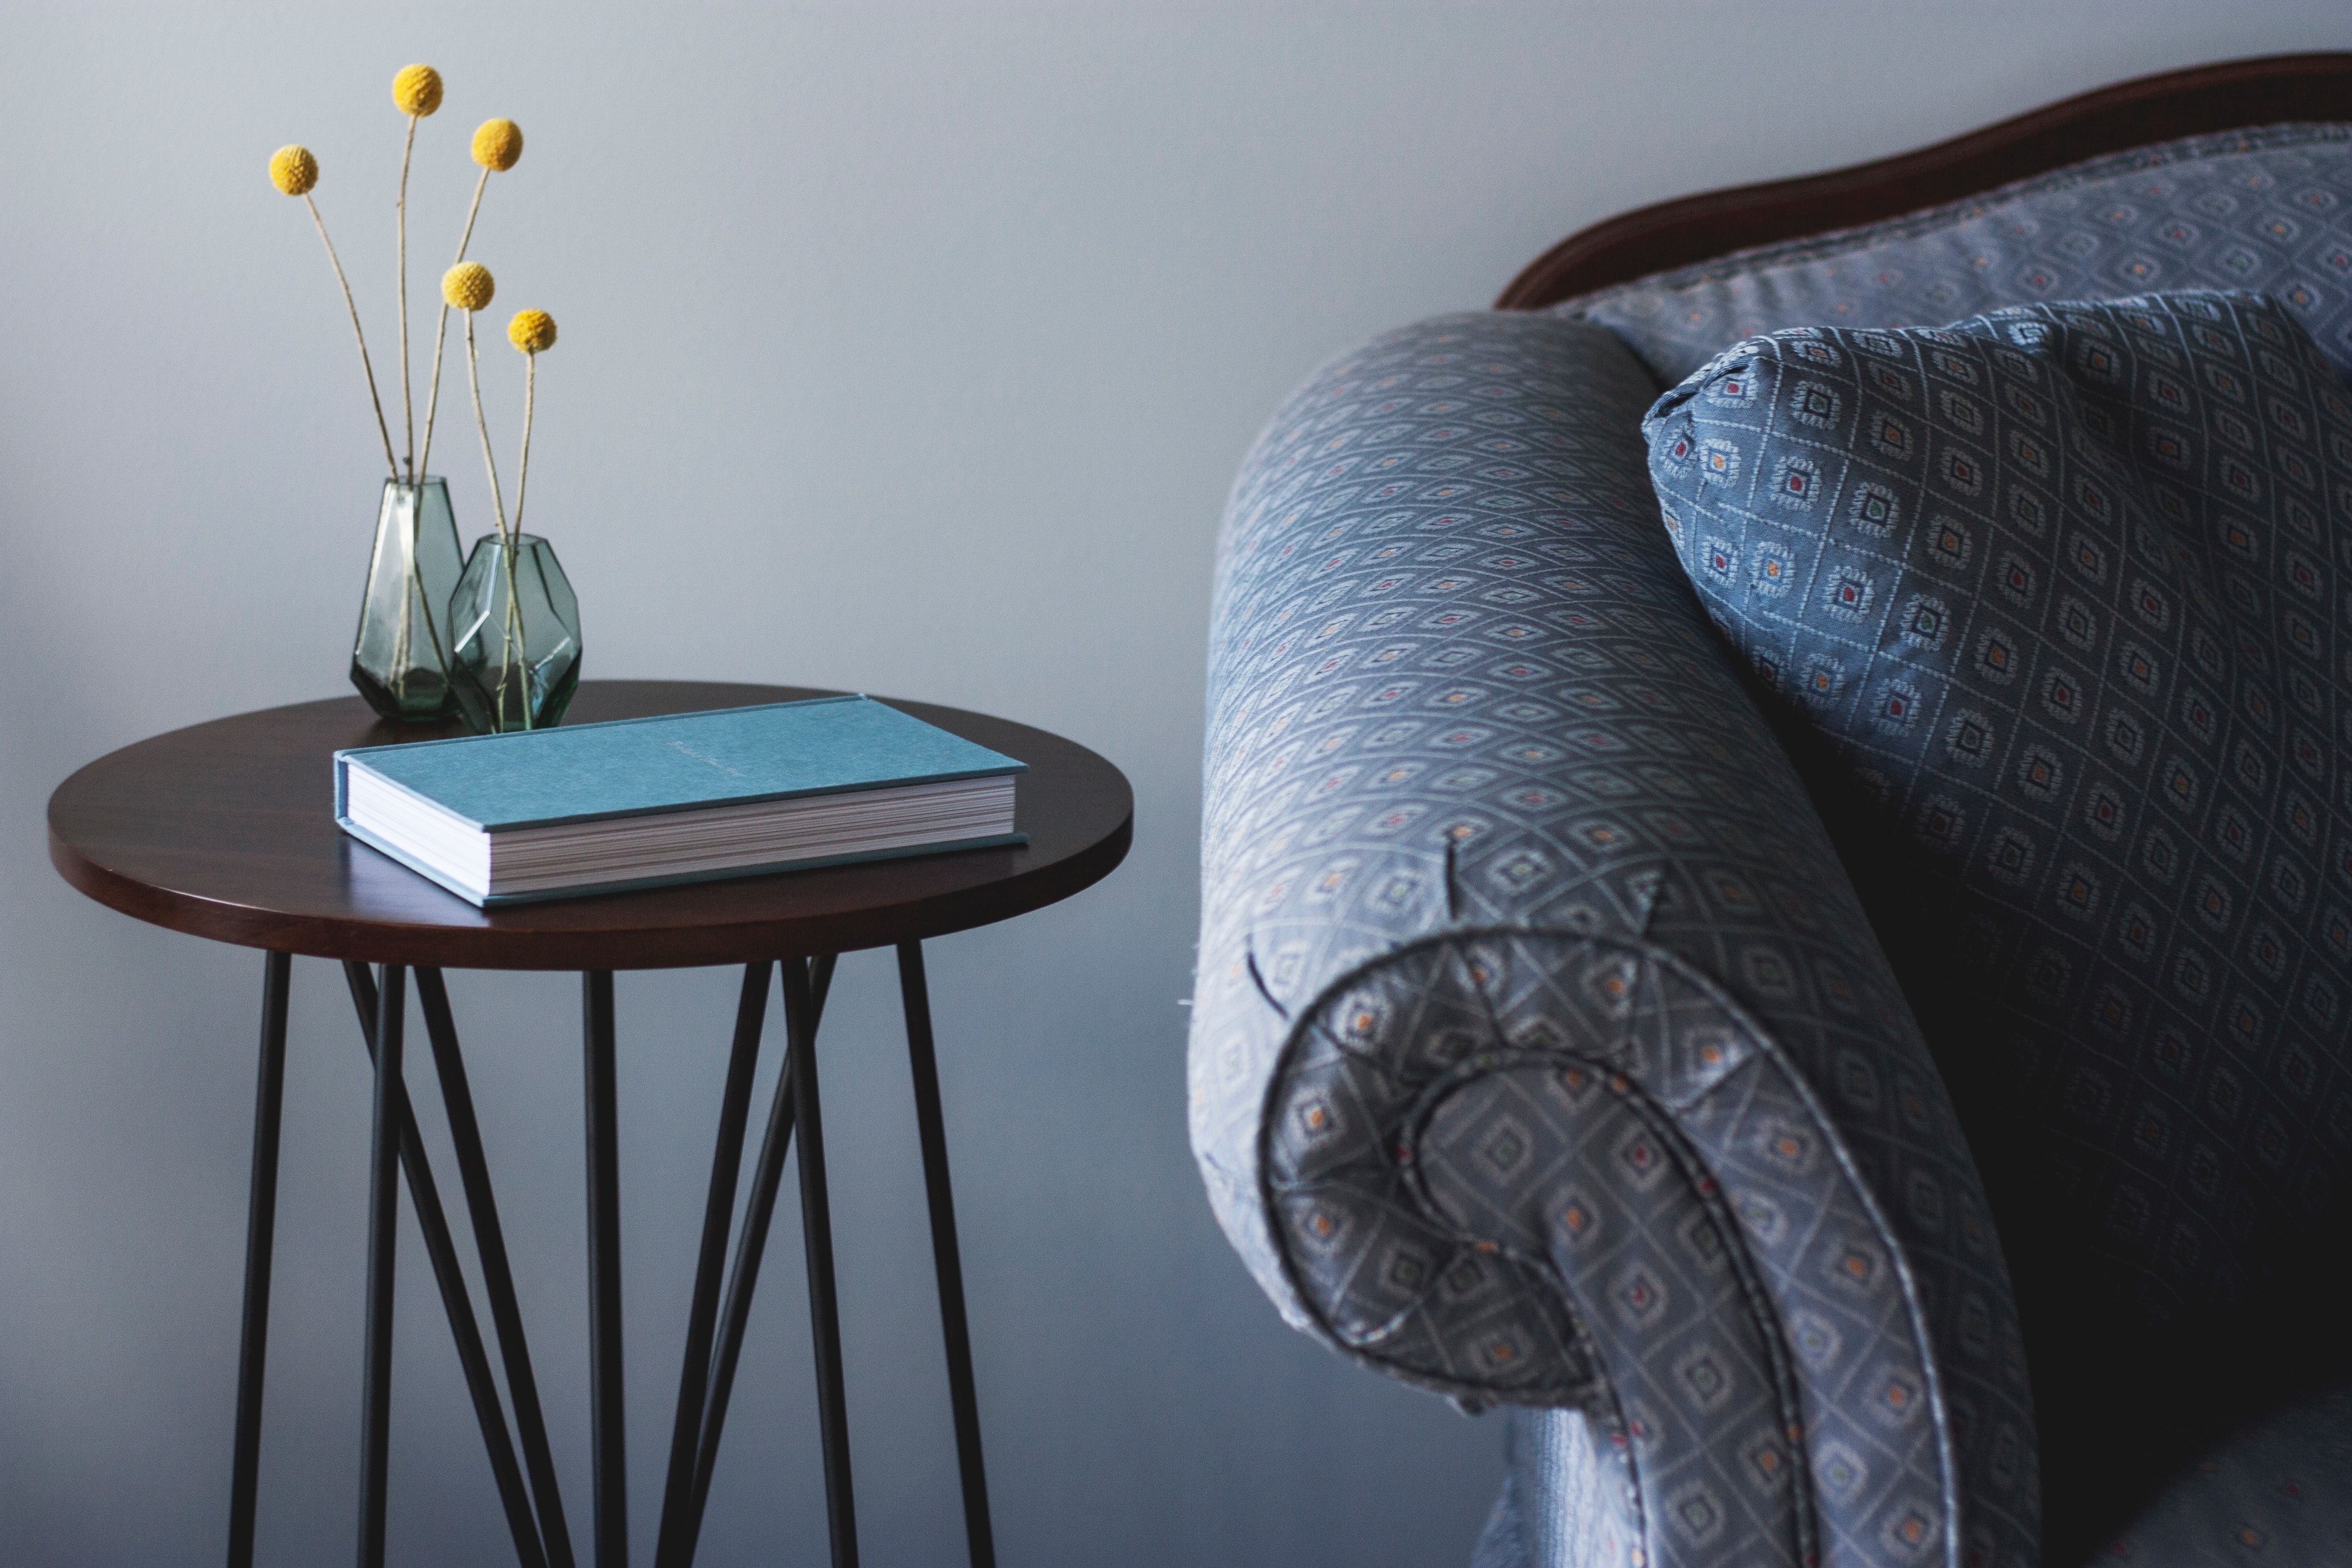 This photo is decorative. A blue chair and side table with a notebook.